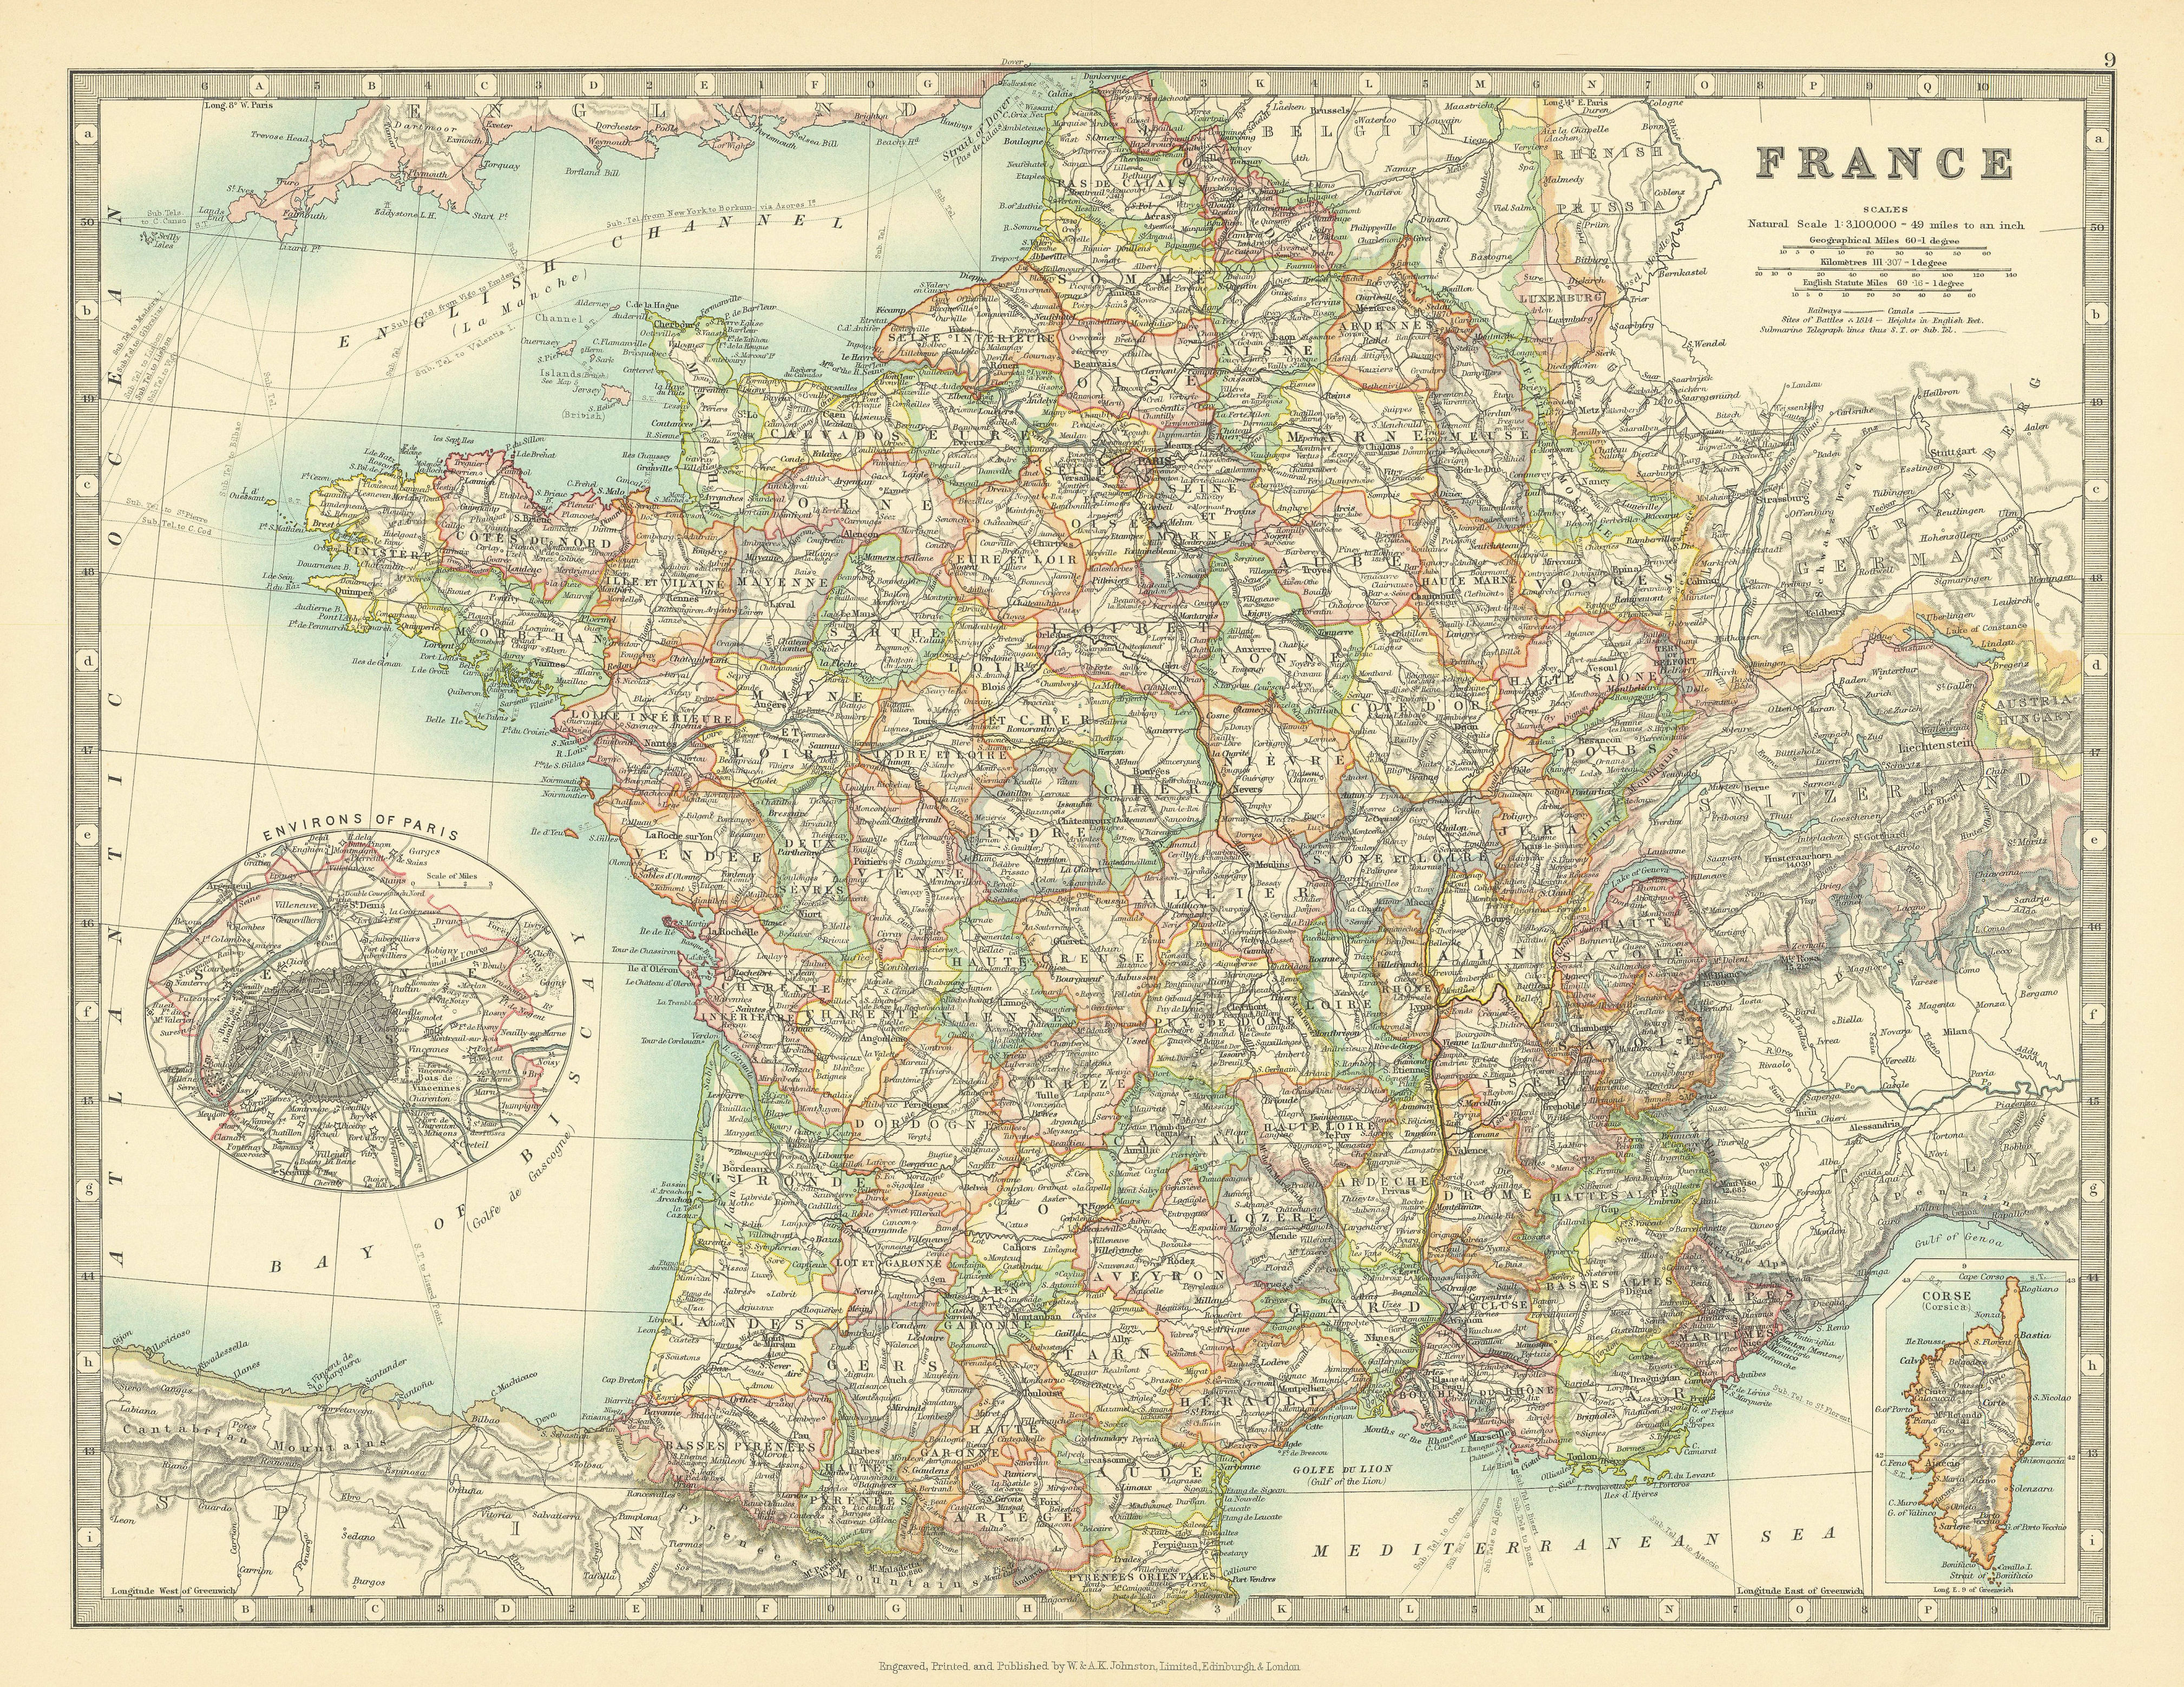 Associate Product FRANCE showing important battlefields and dates. JOHNSTON 1911 old antique map